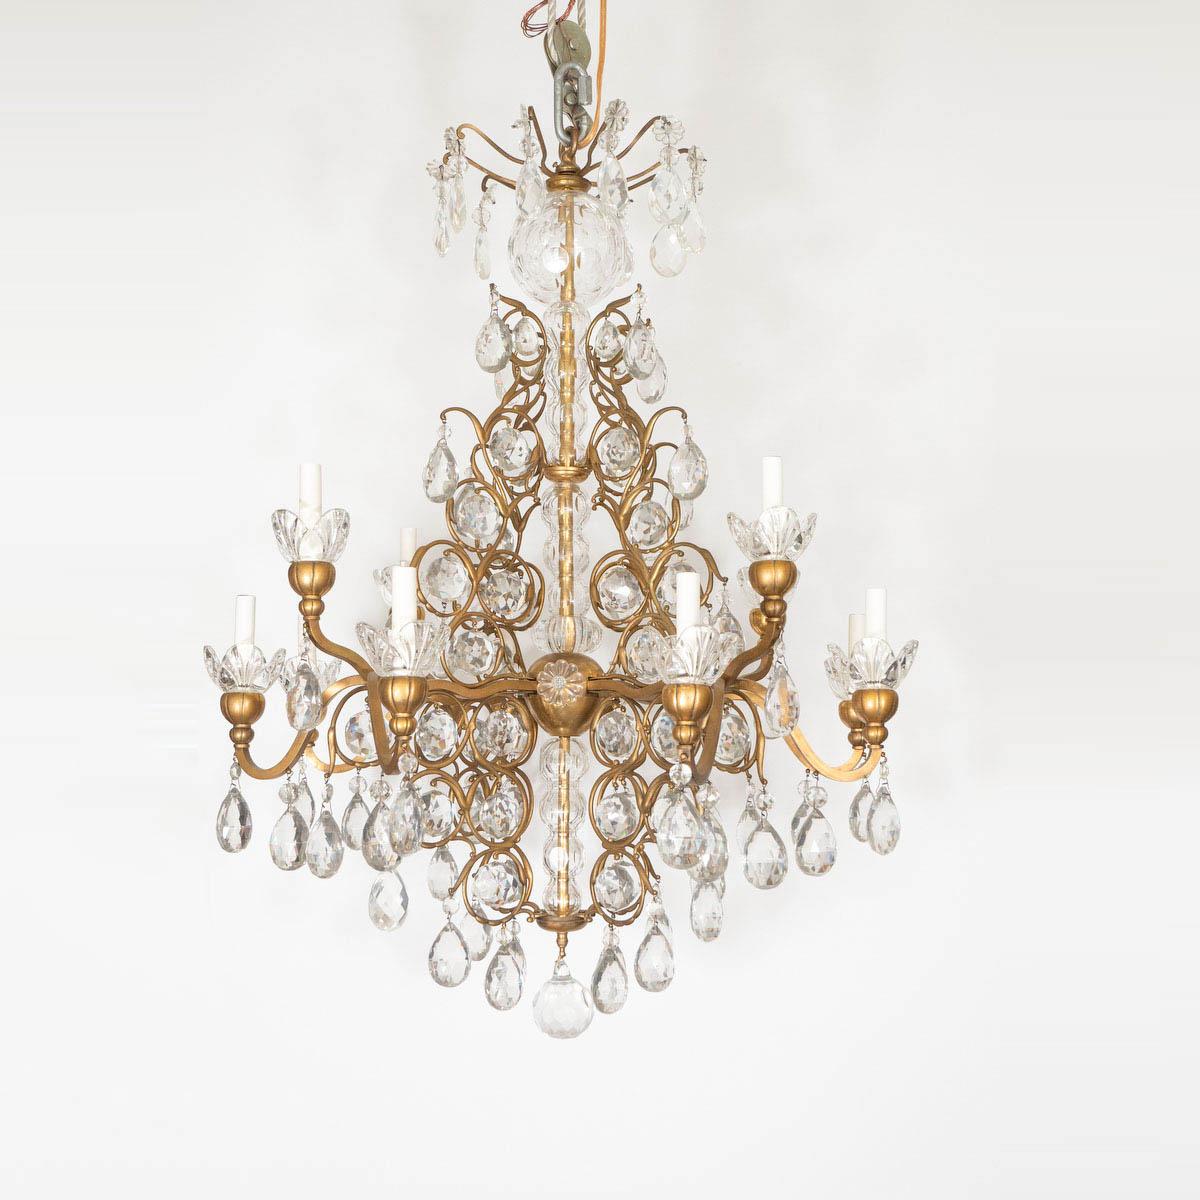 Mid-20th Century Traditional Gilt Metal Crystal Drop Chandelier For Sale